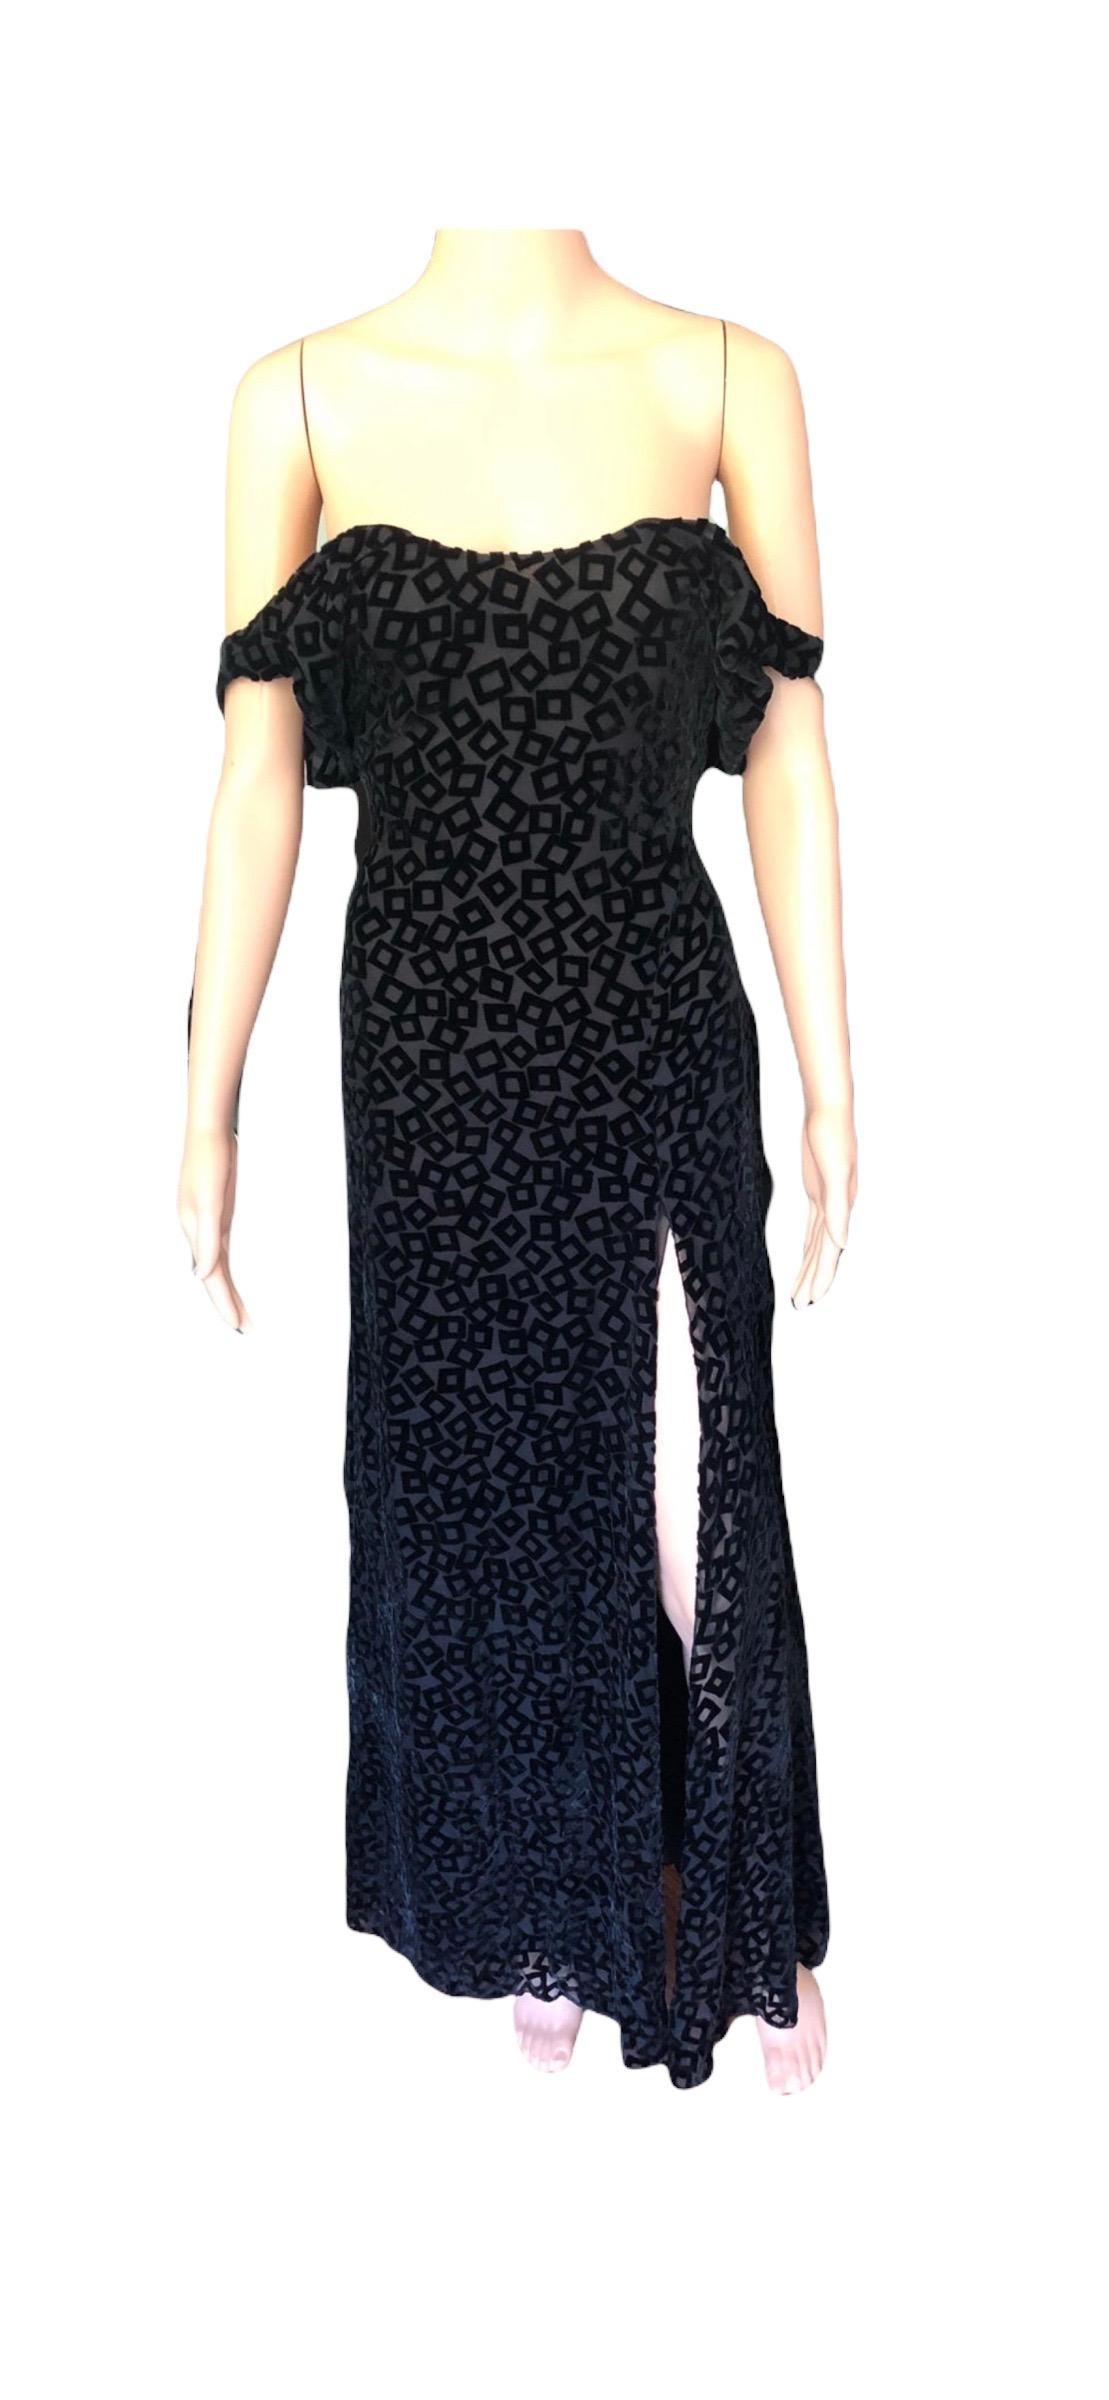 Gianni Versace S/S 1999 Vintage Black Evening Dress Gown For Sale 11